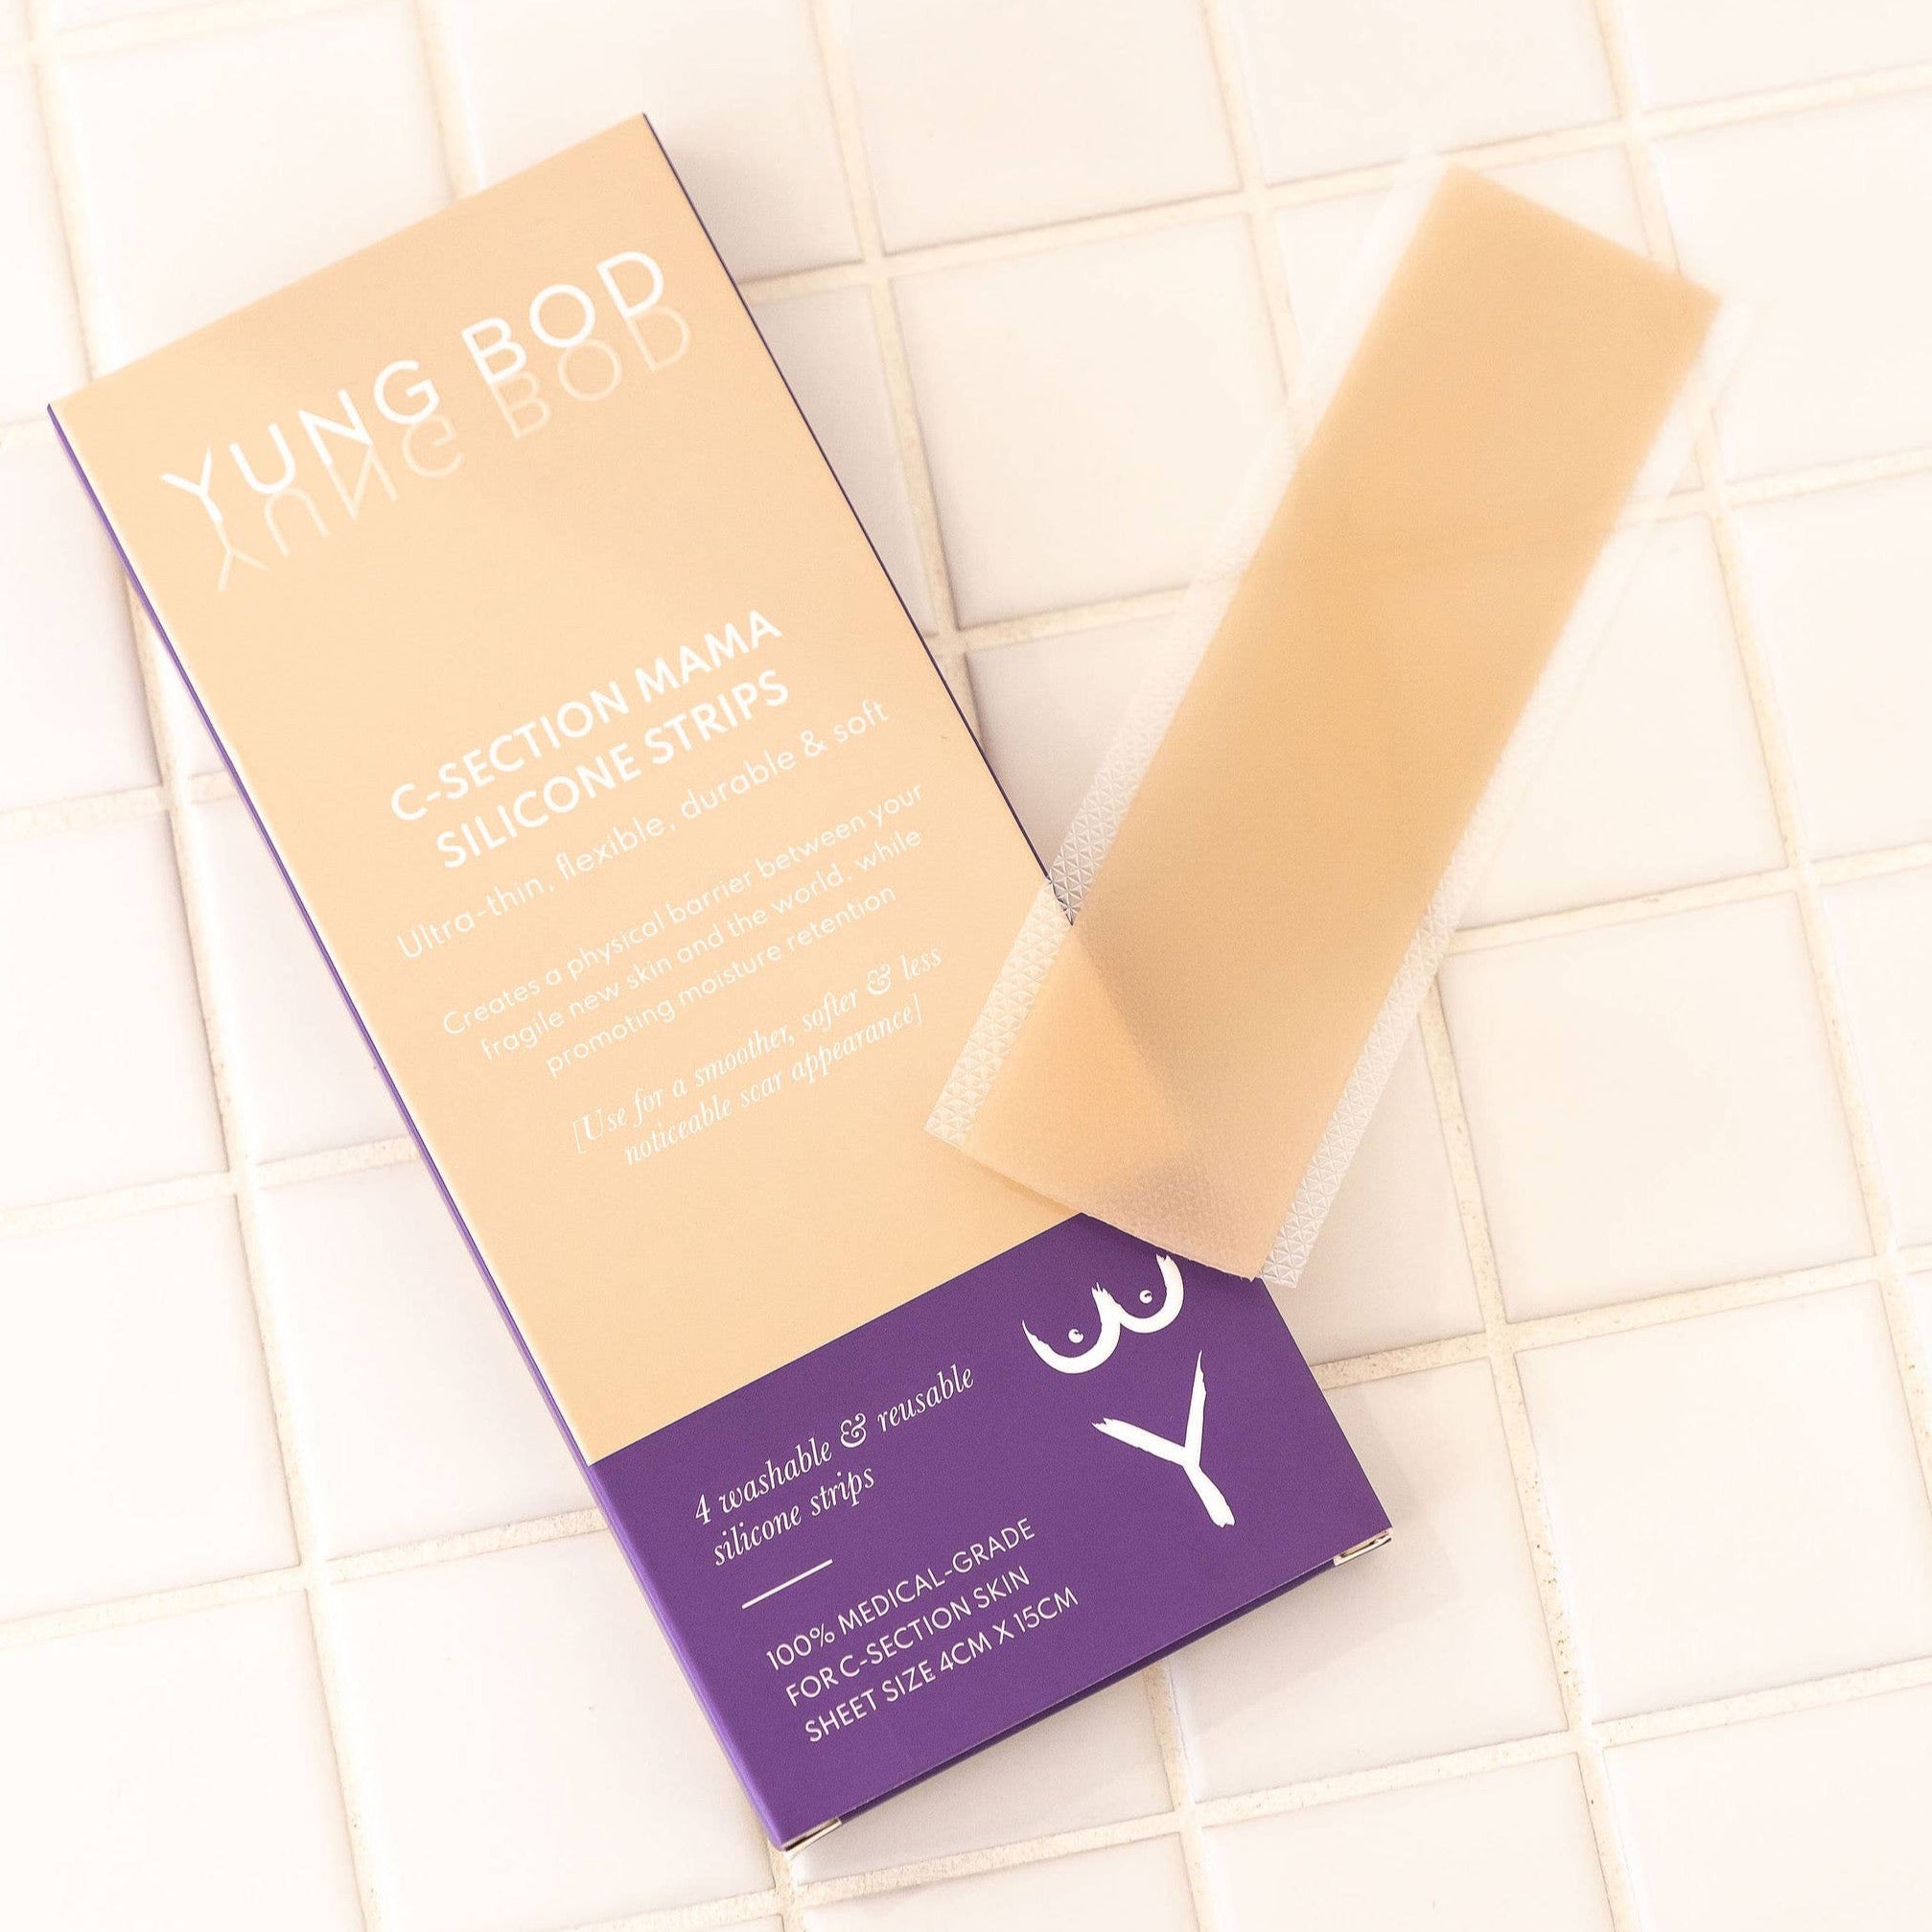 C-Section Silicone Strips by YUNG BOD